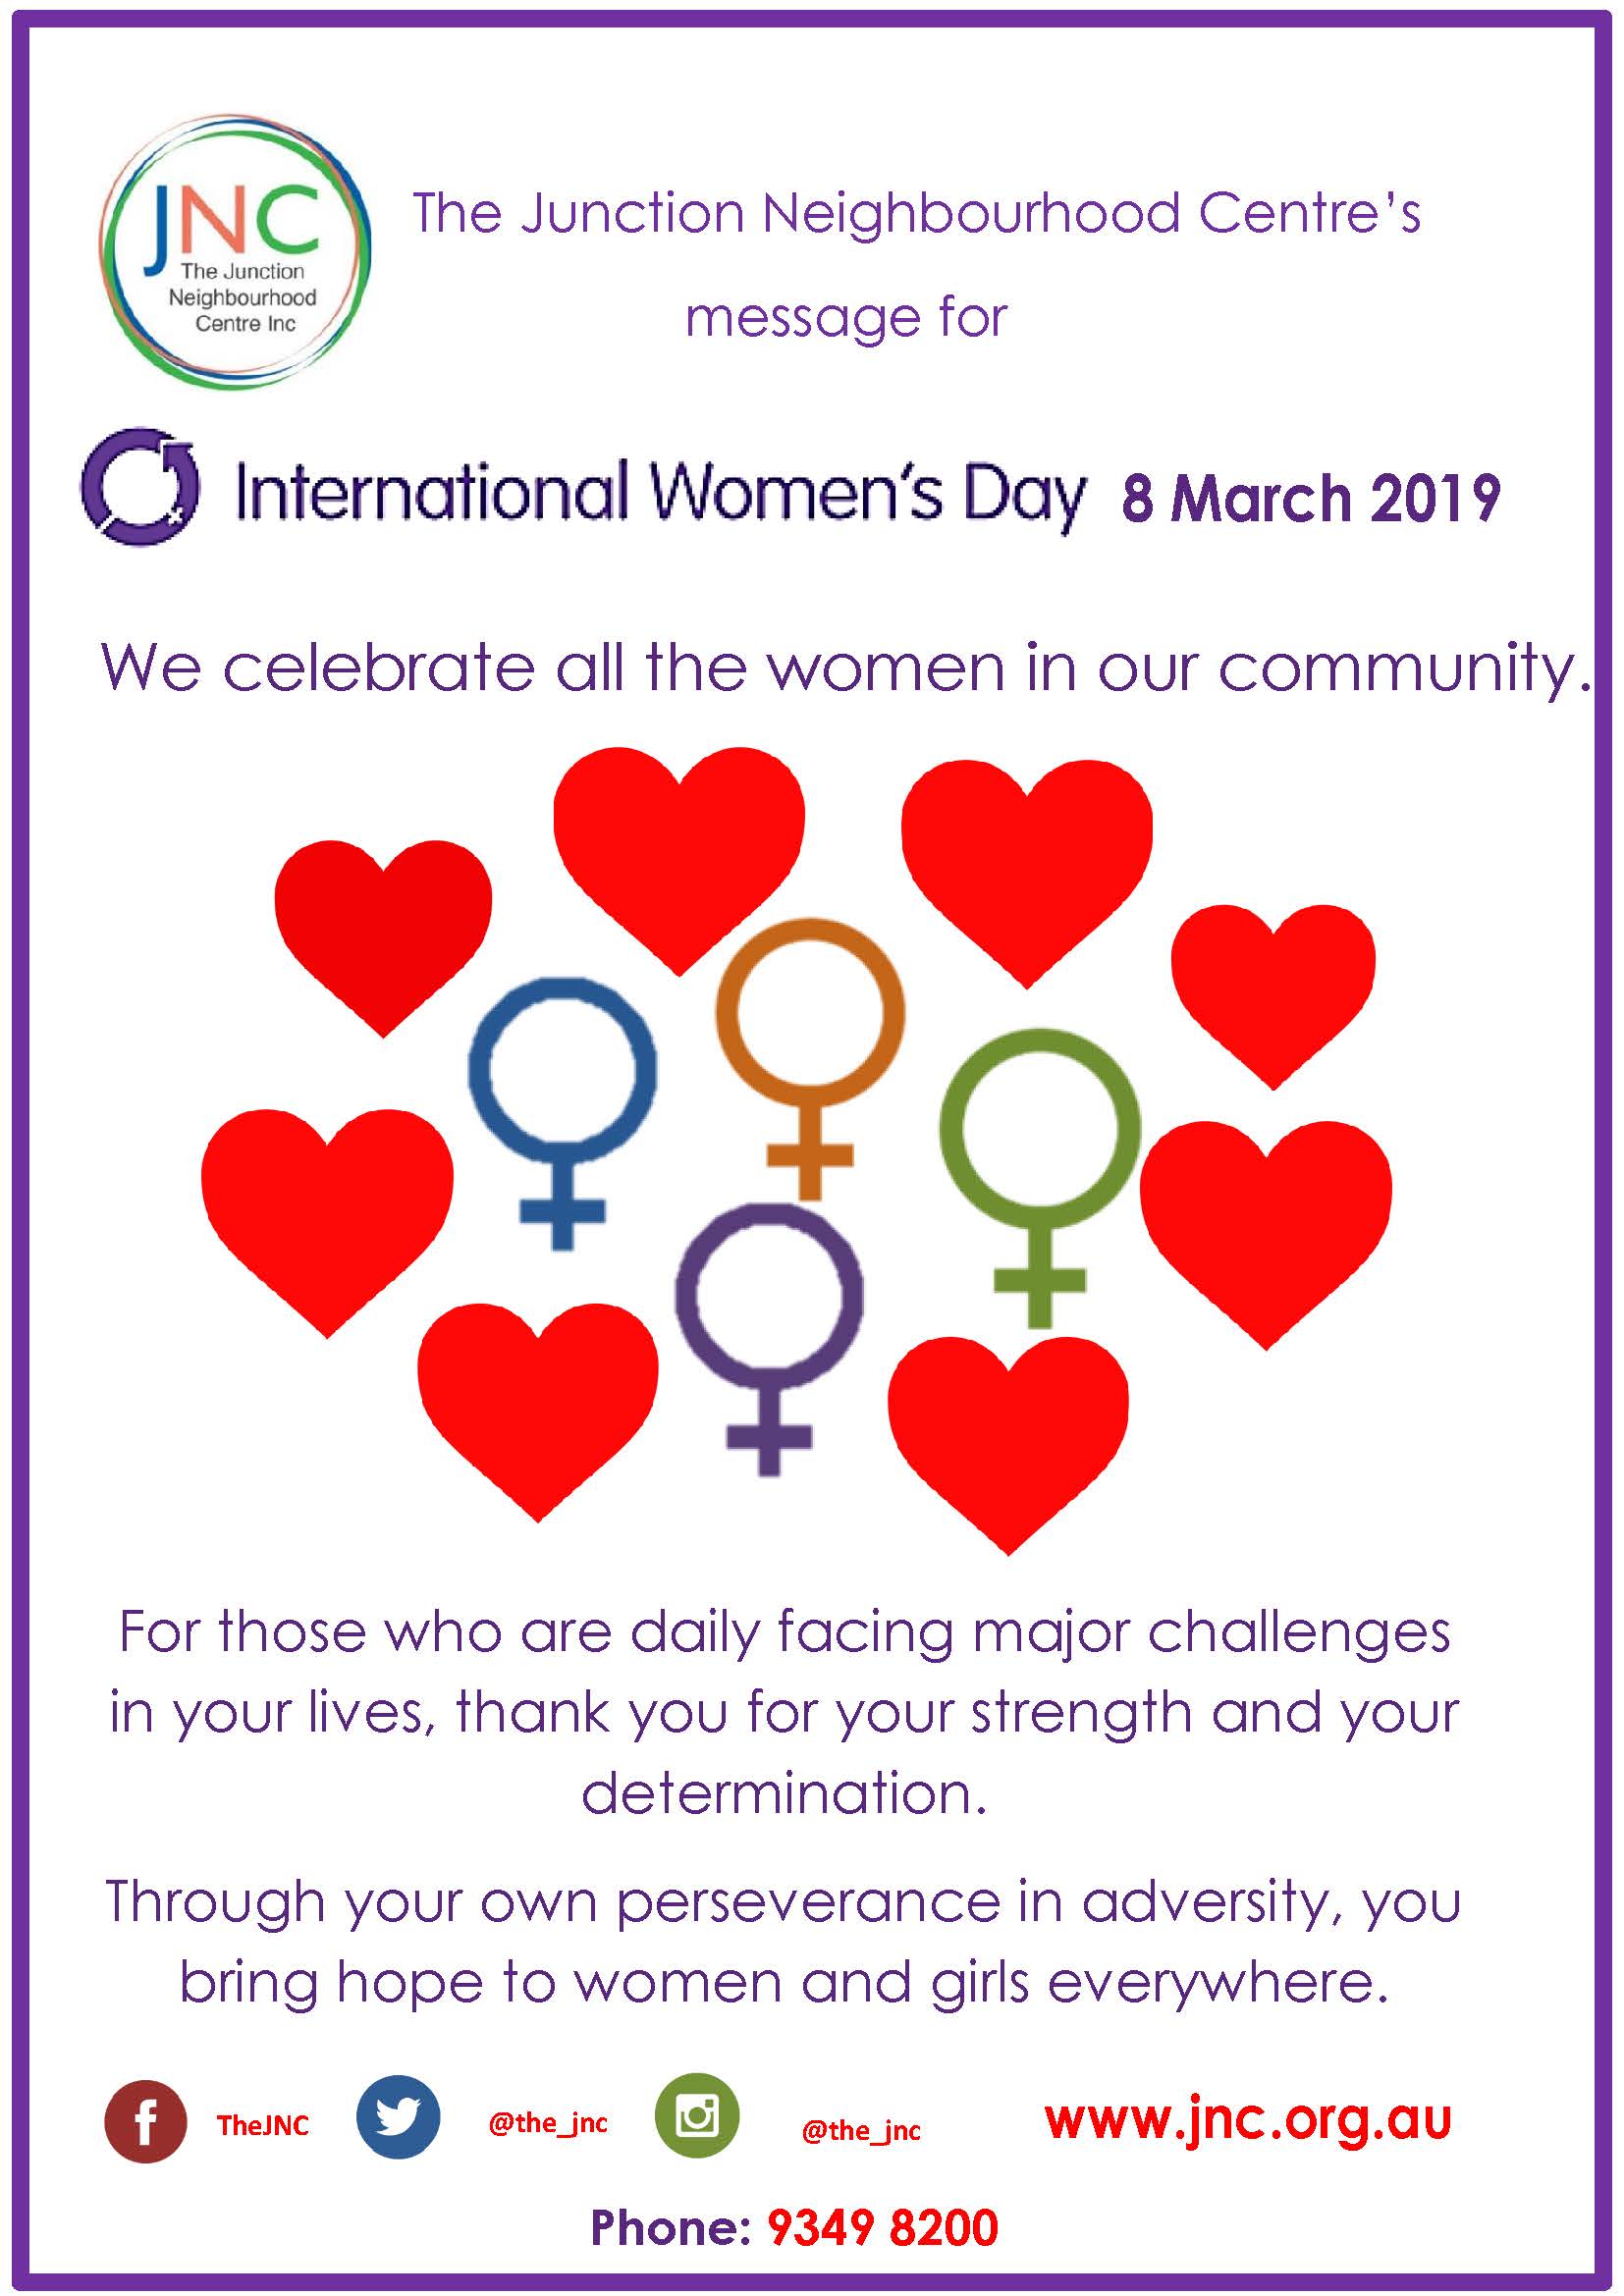 JNC International Women's Day poster offering support to women in the community